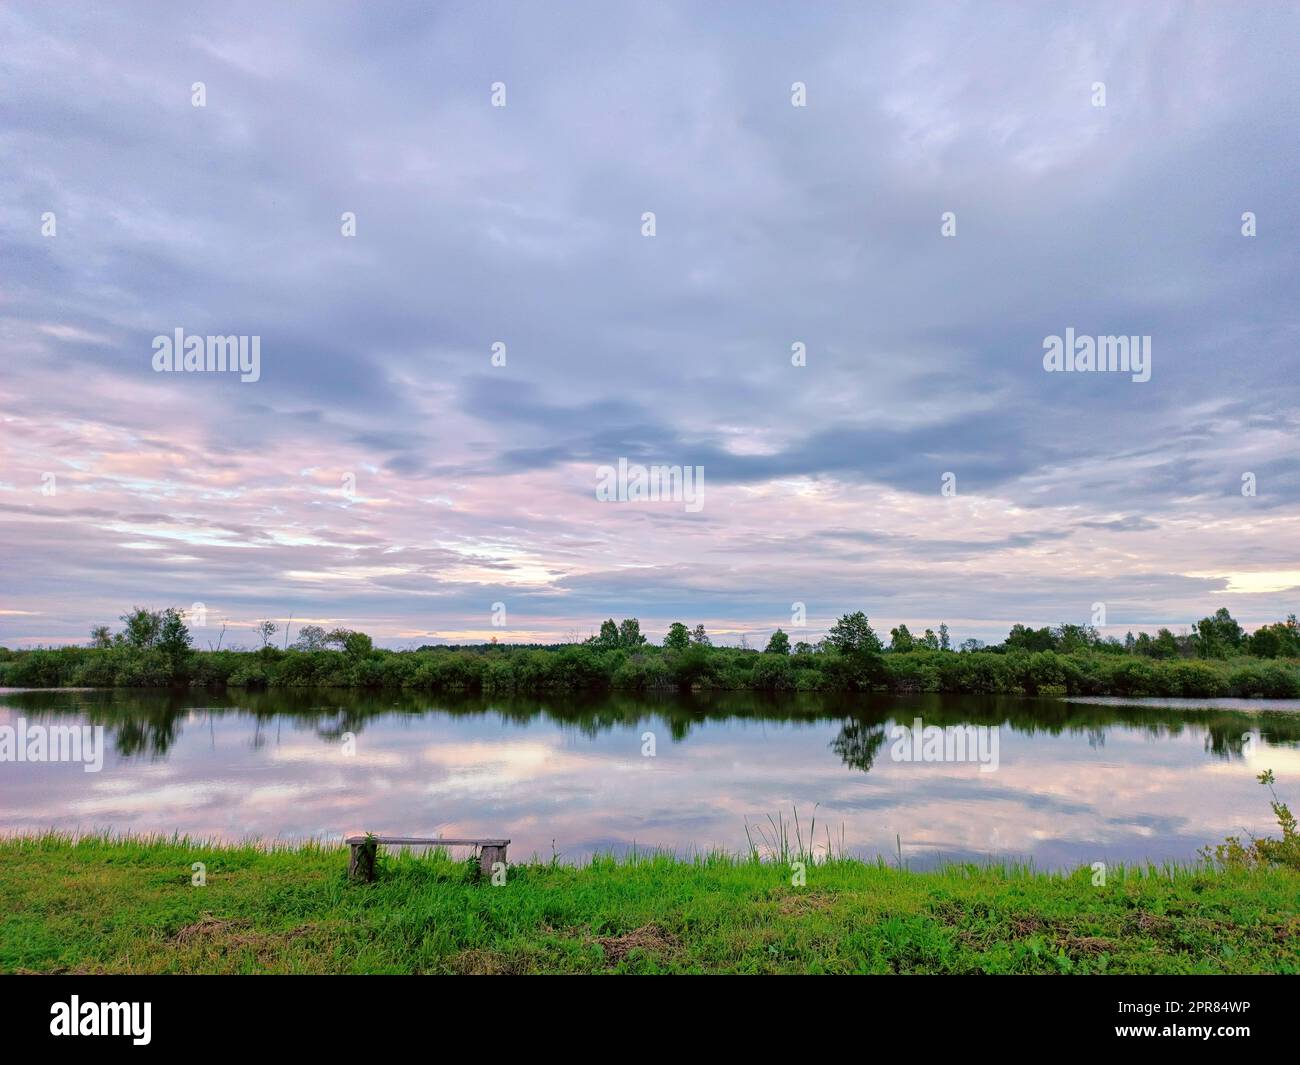 Calm water on lake. Storm Rainy weather. Summer overcast sky. Dramatic landscape, cloudy day. Stock Photo